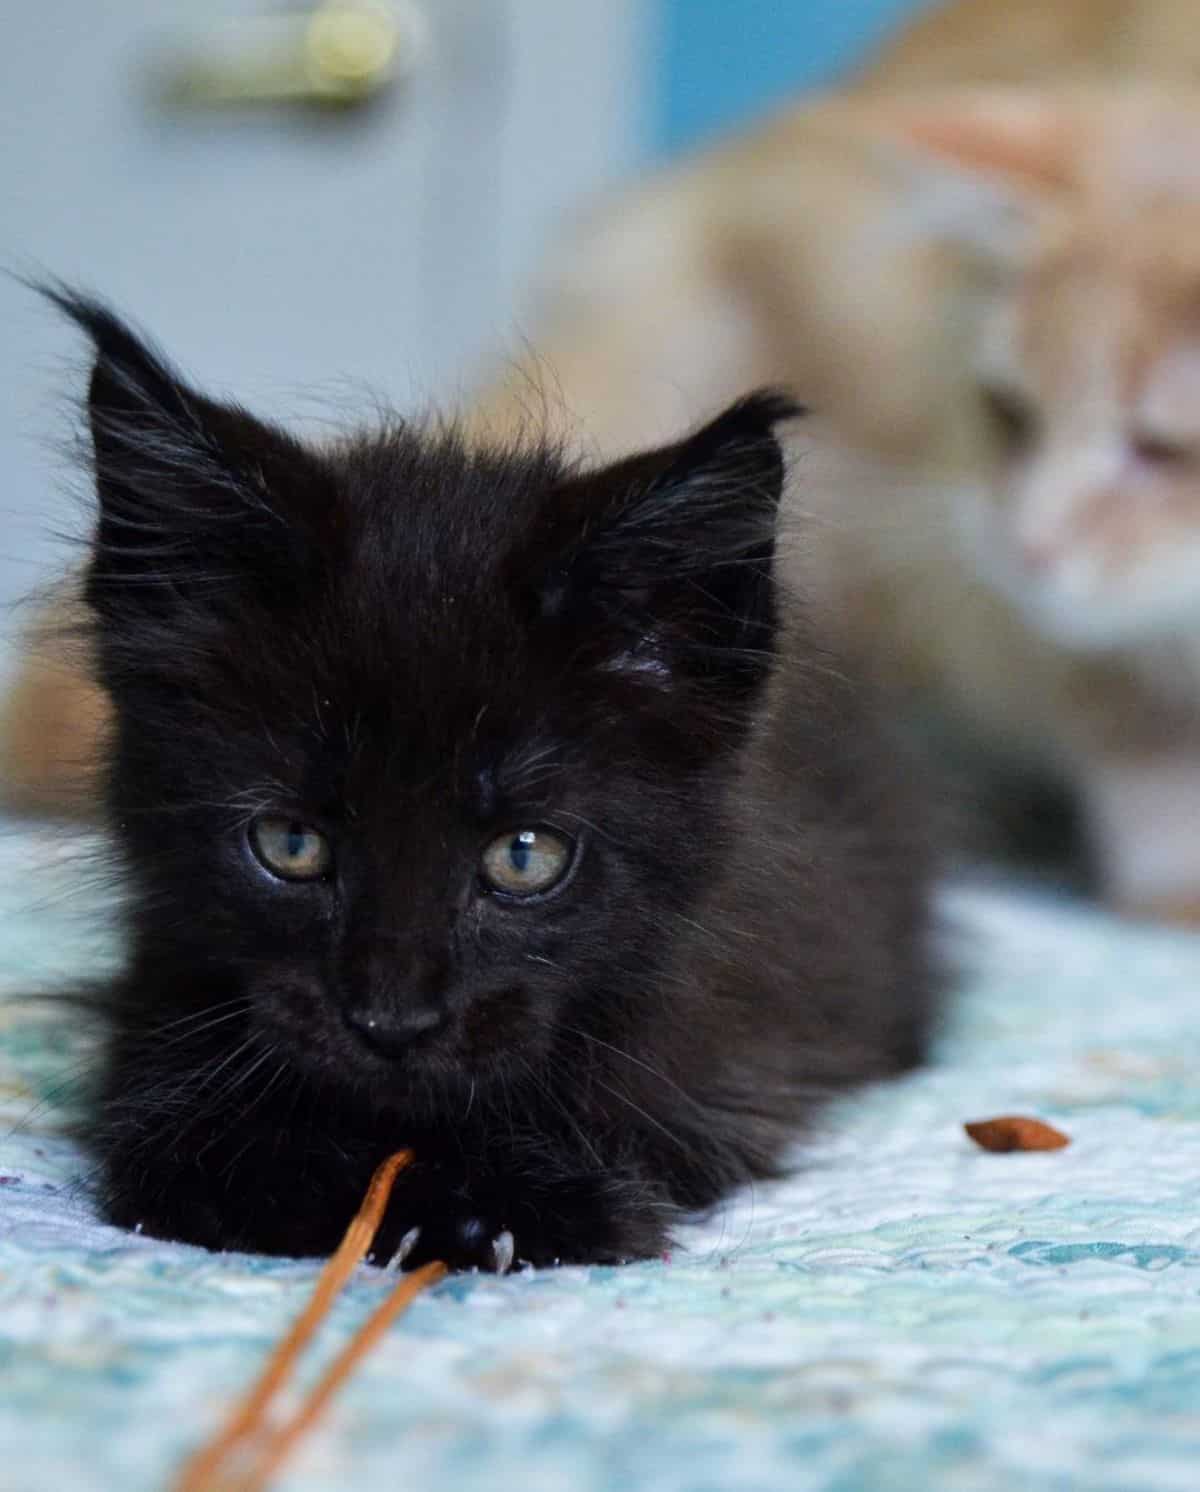 A cute black maine coon kitten playing on a bed.